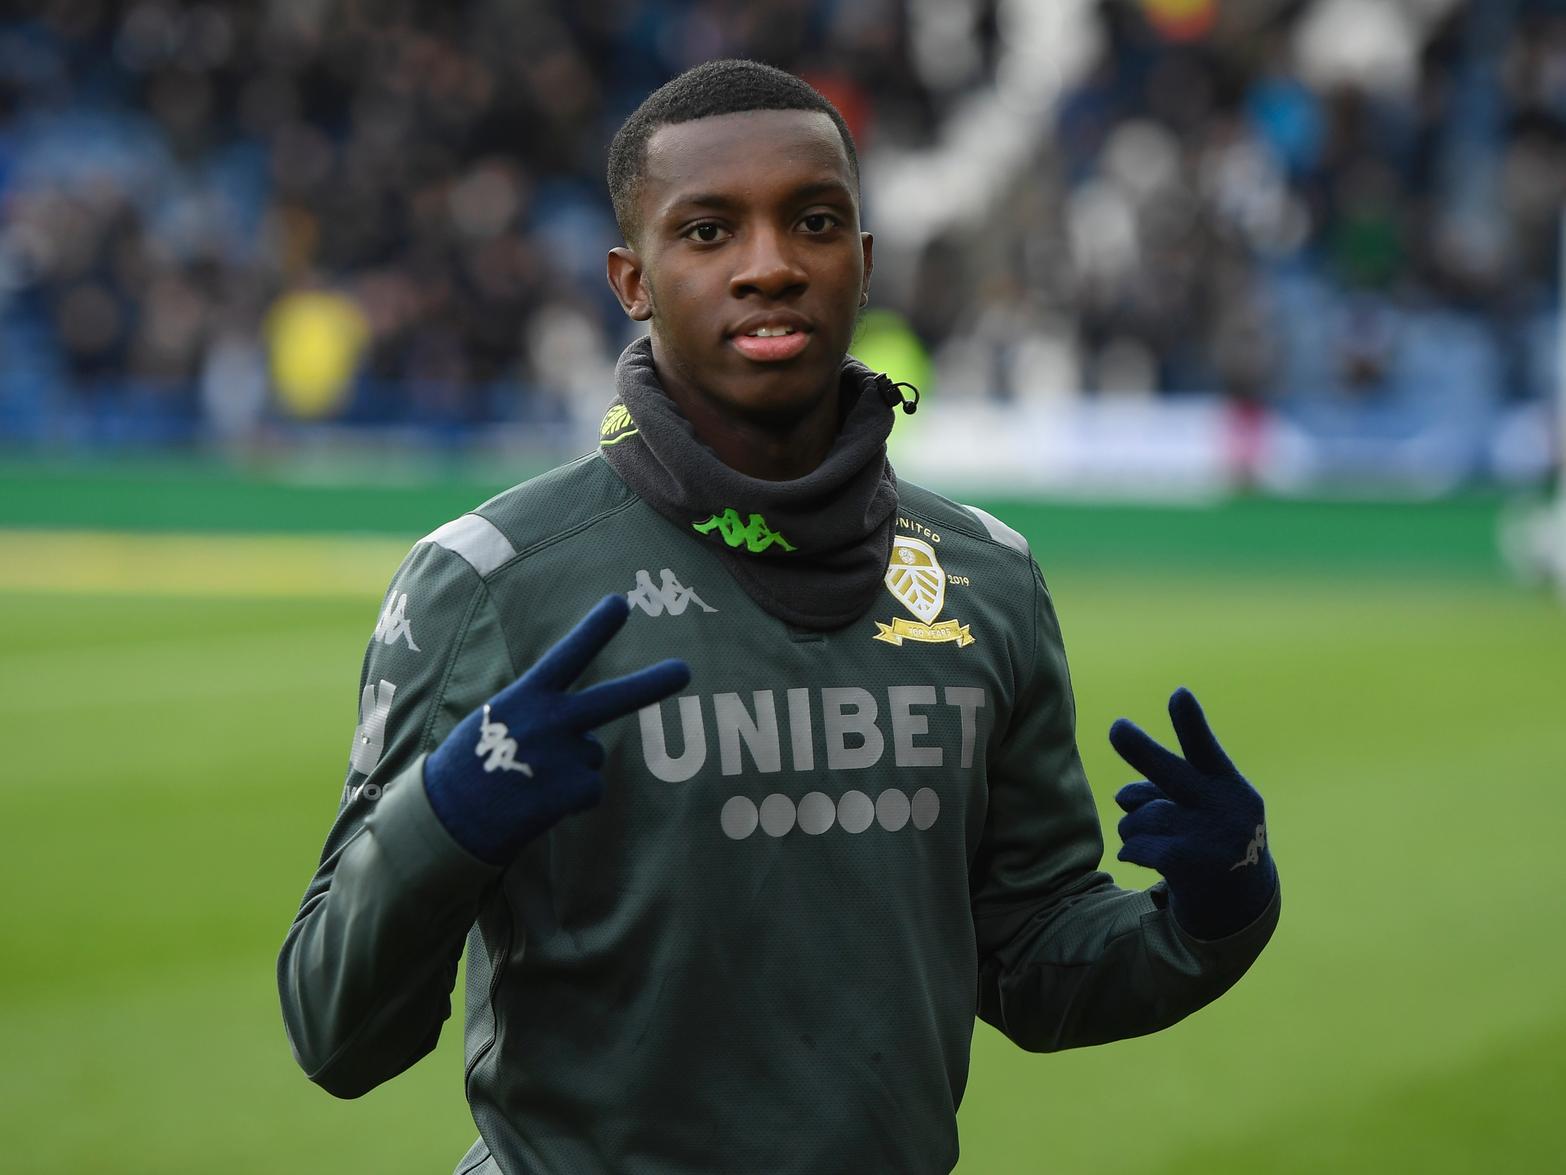 Leeds United chief executive Angus Kinnear has revealed that the club are still hopeful of keeping Eddie Nketiah at the club on loan, amid talk that the Arsenal man will be recalled in January. (Yorkshire Post)